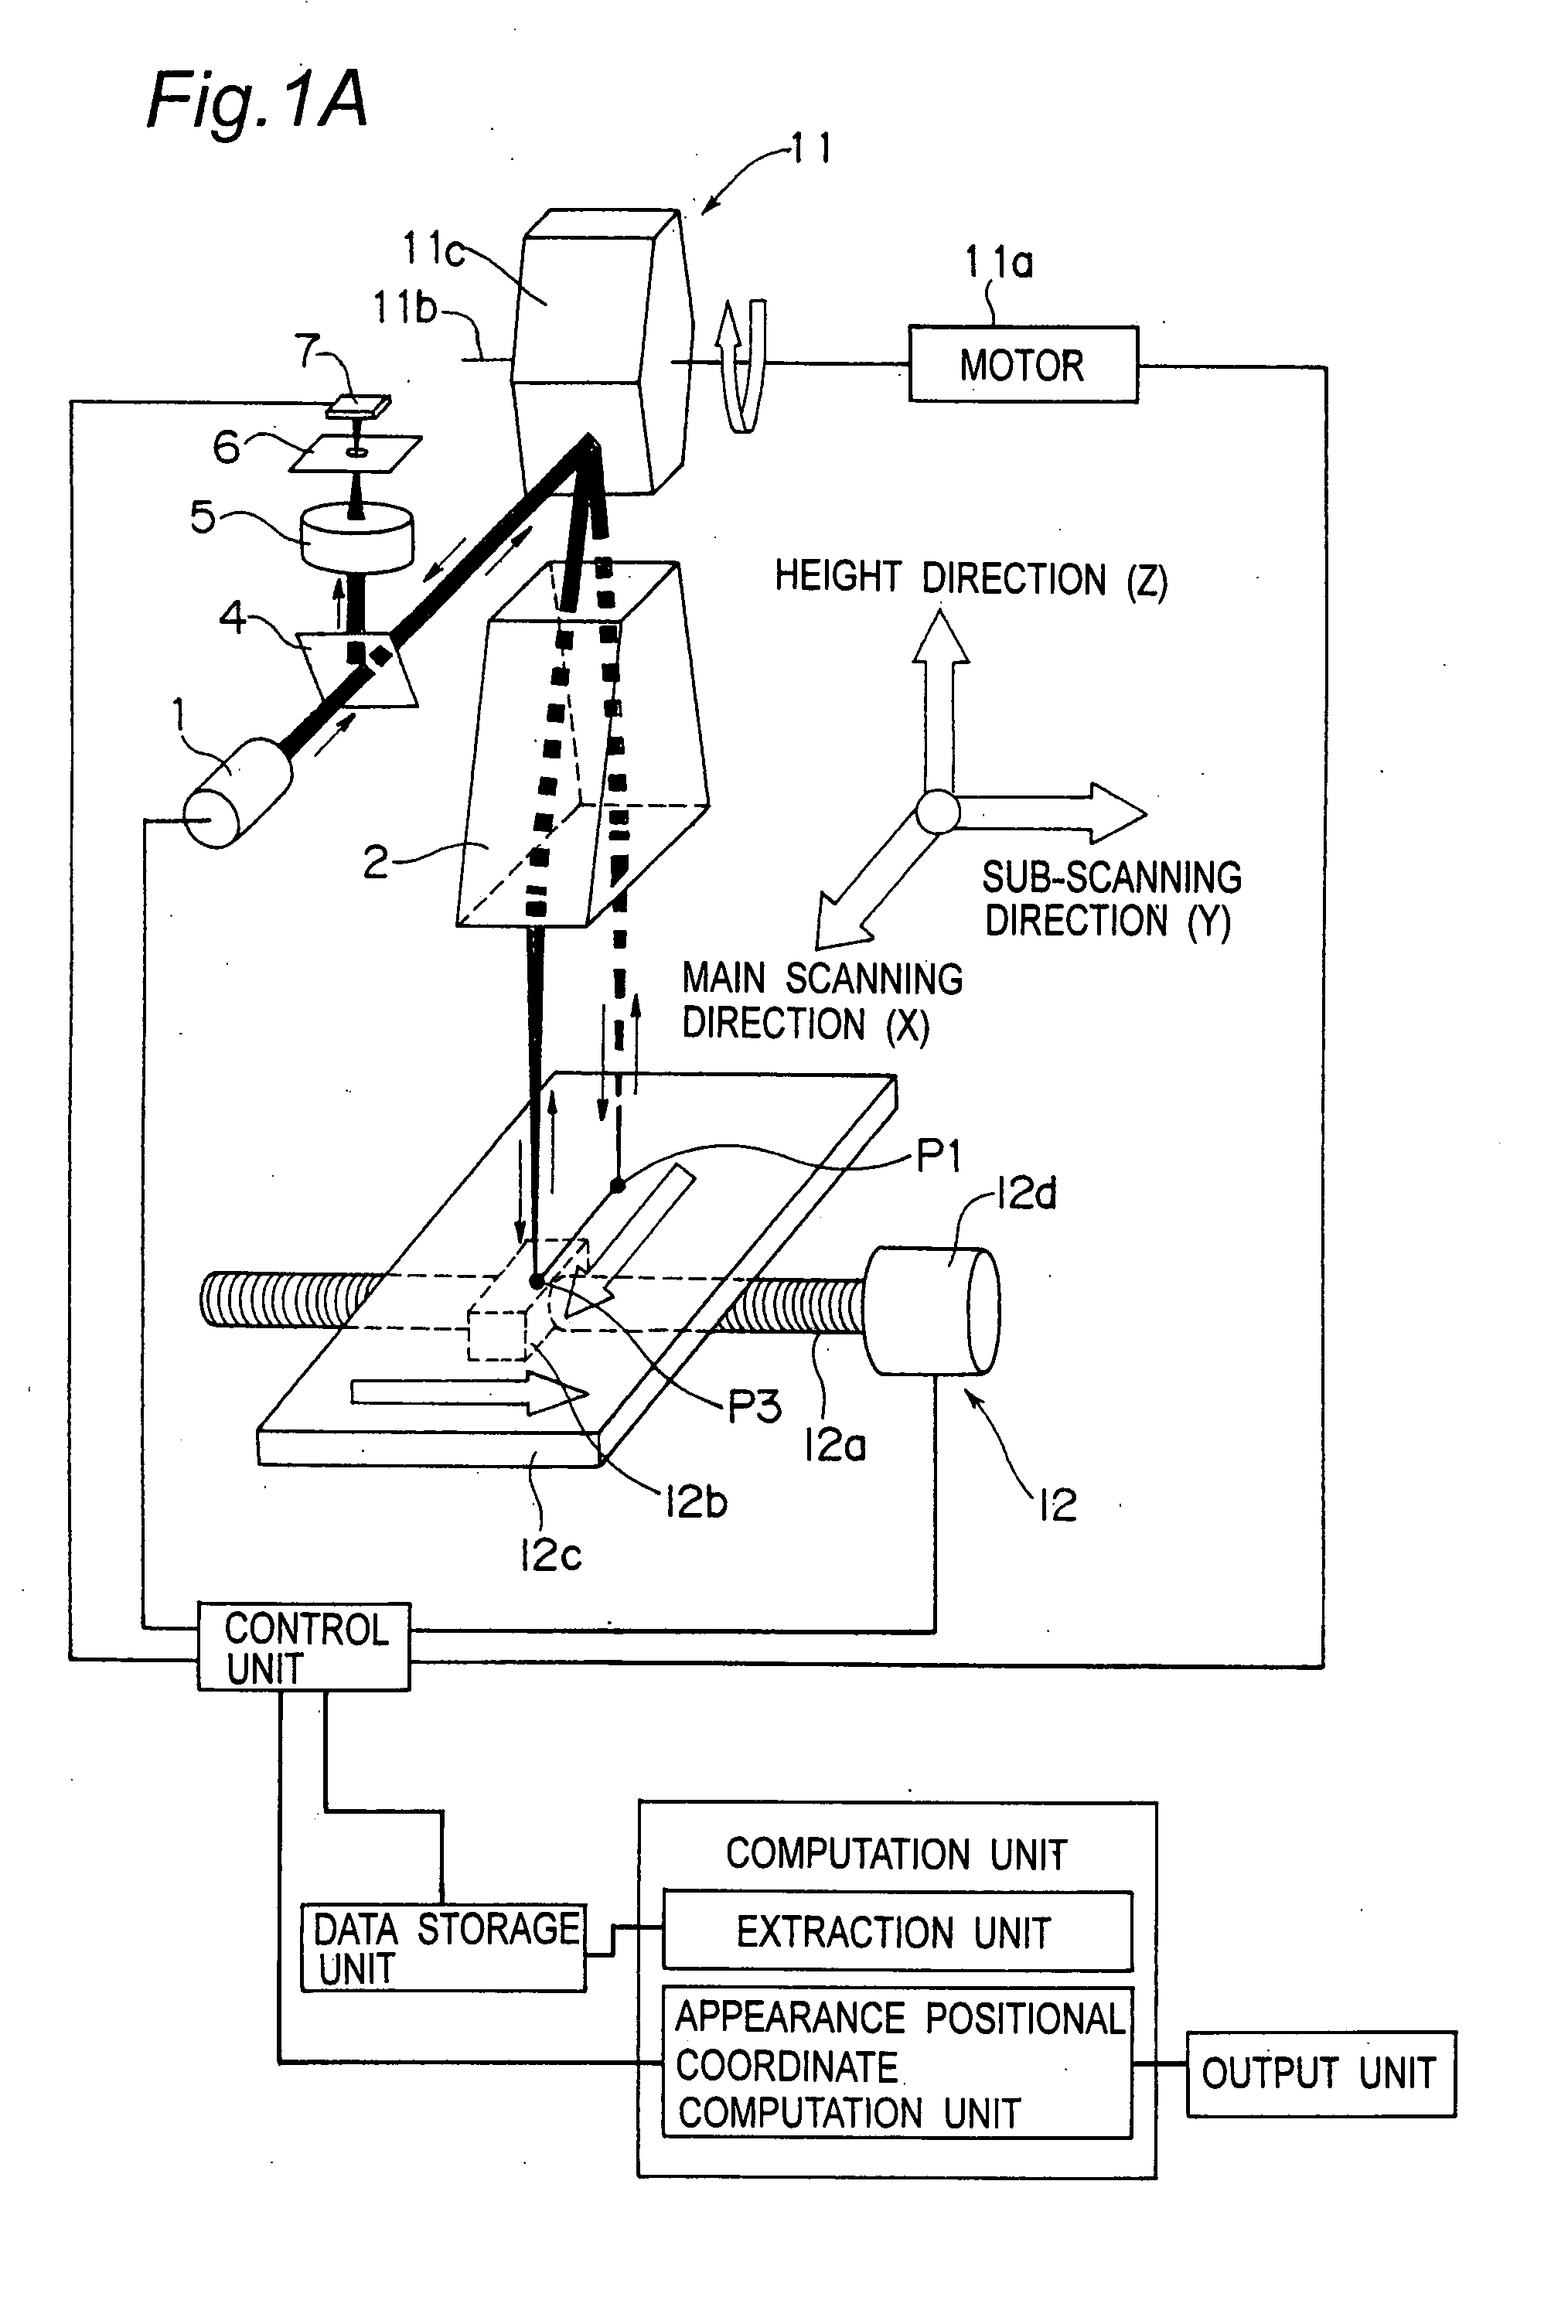 Apparatus and Method for Appearance Inspection